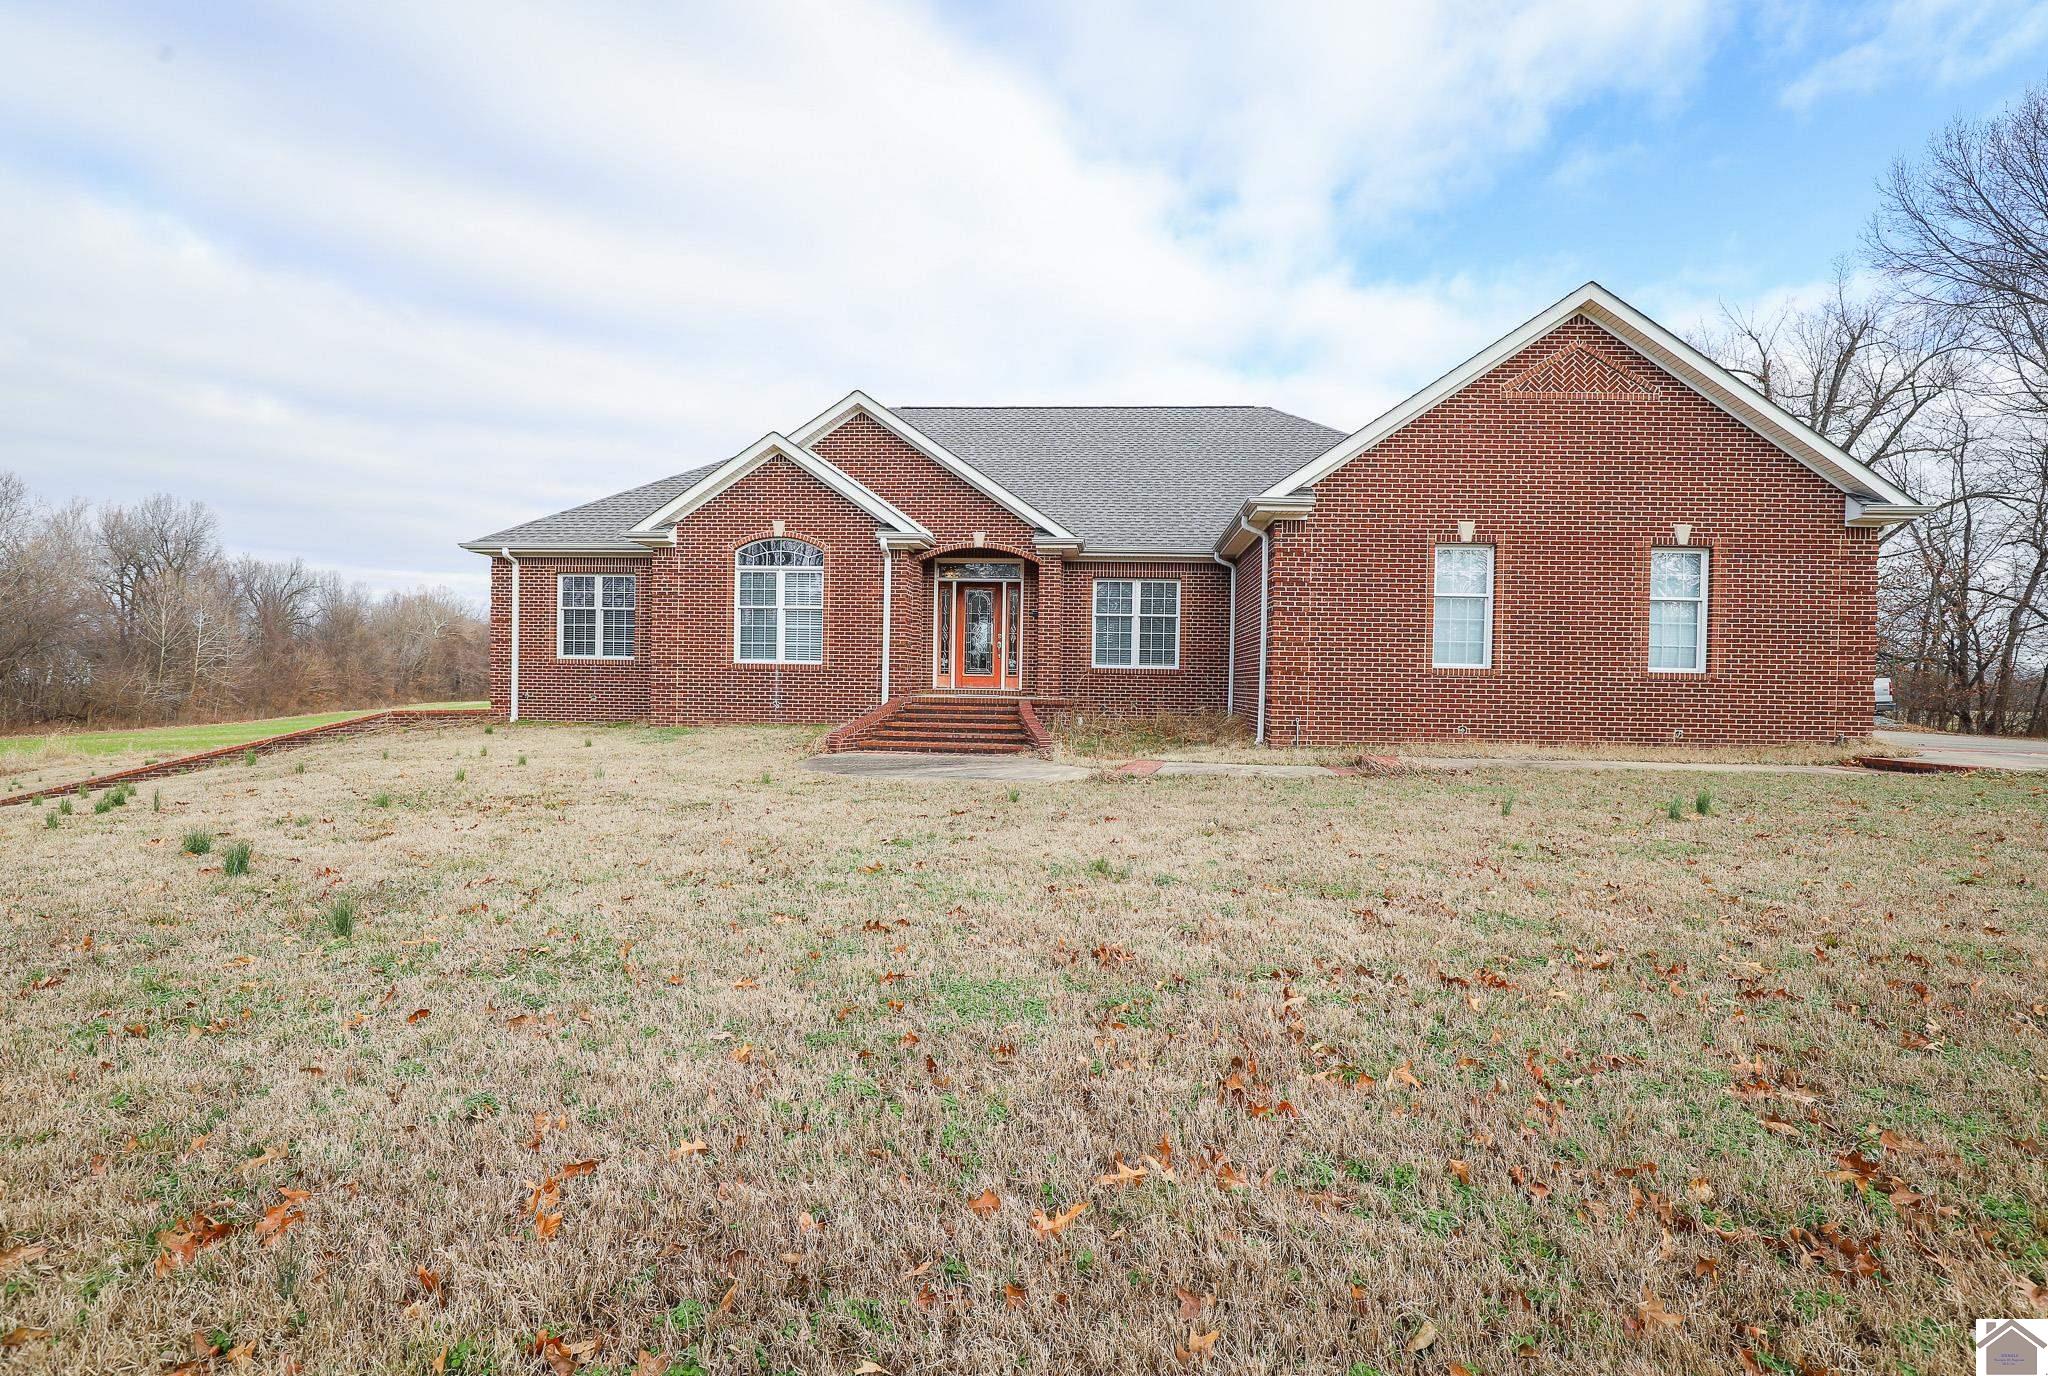 7871 Old Hinkleville Rd, West Paducah, KY 42086 Listing Photo  1